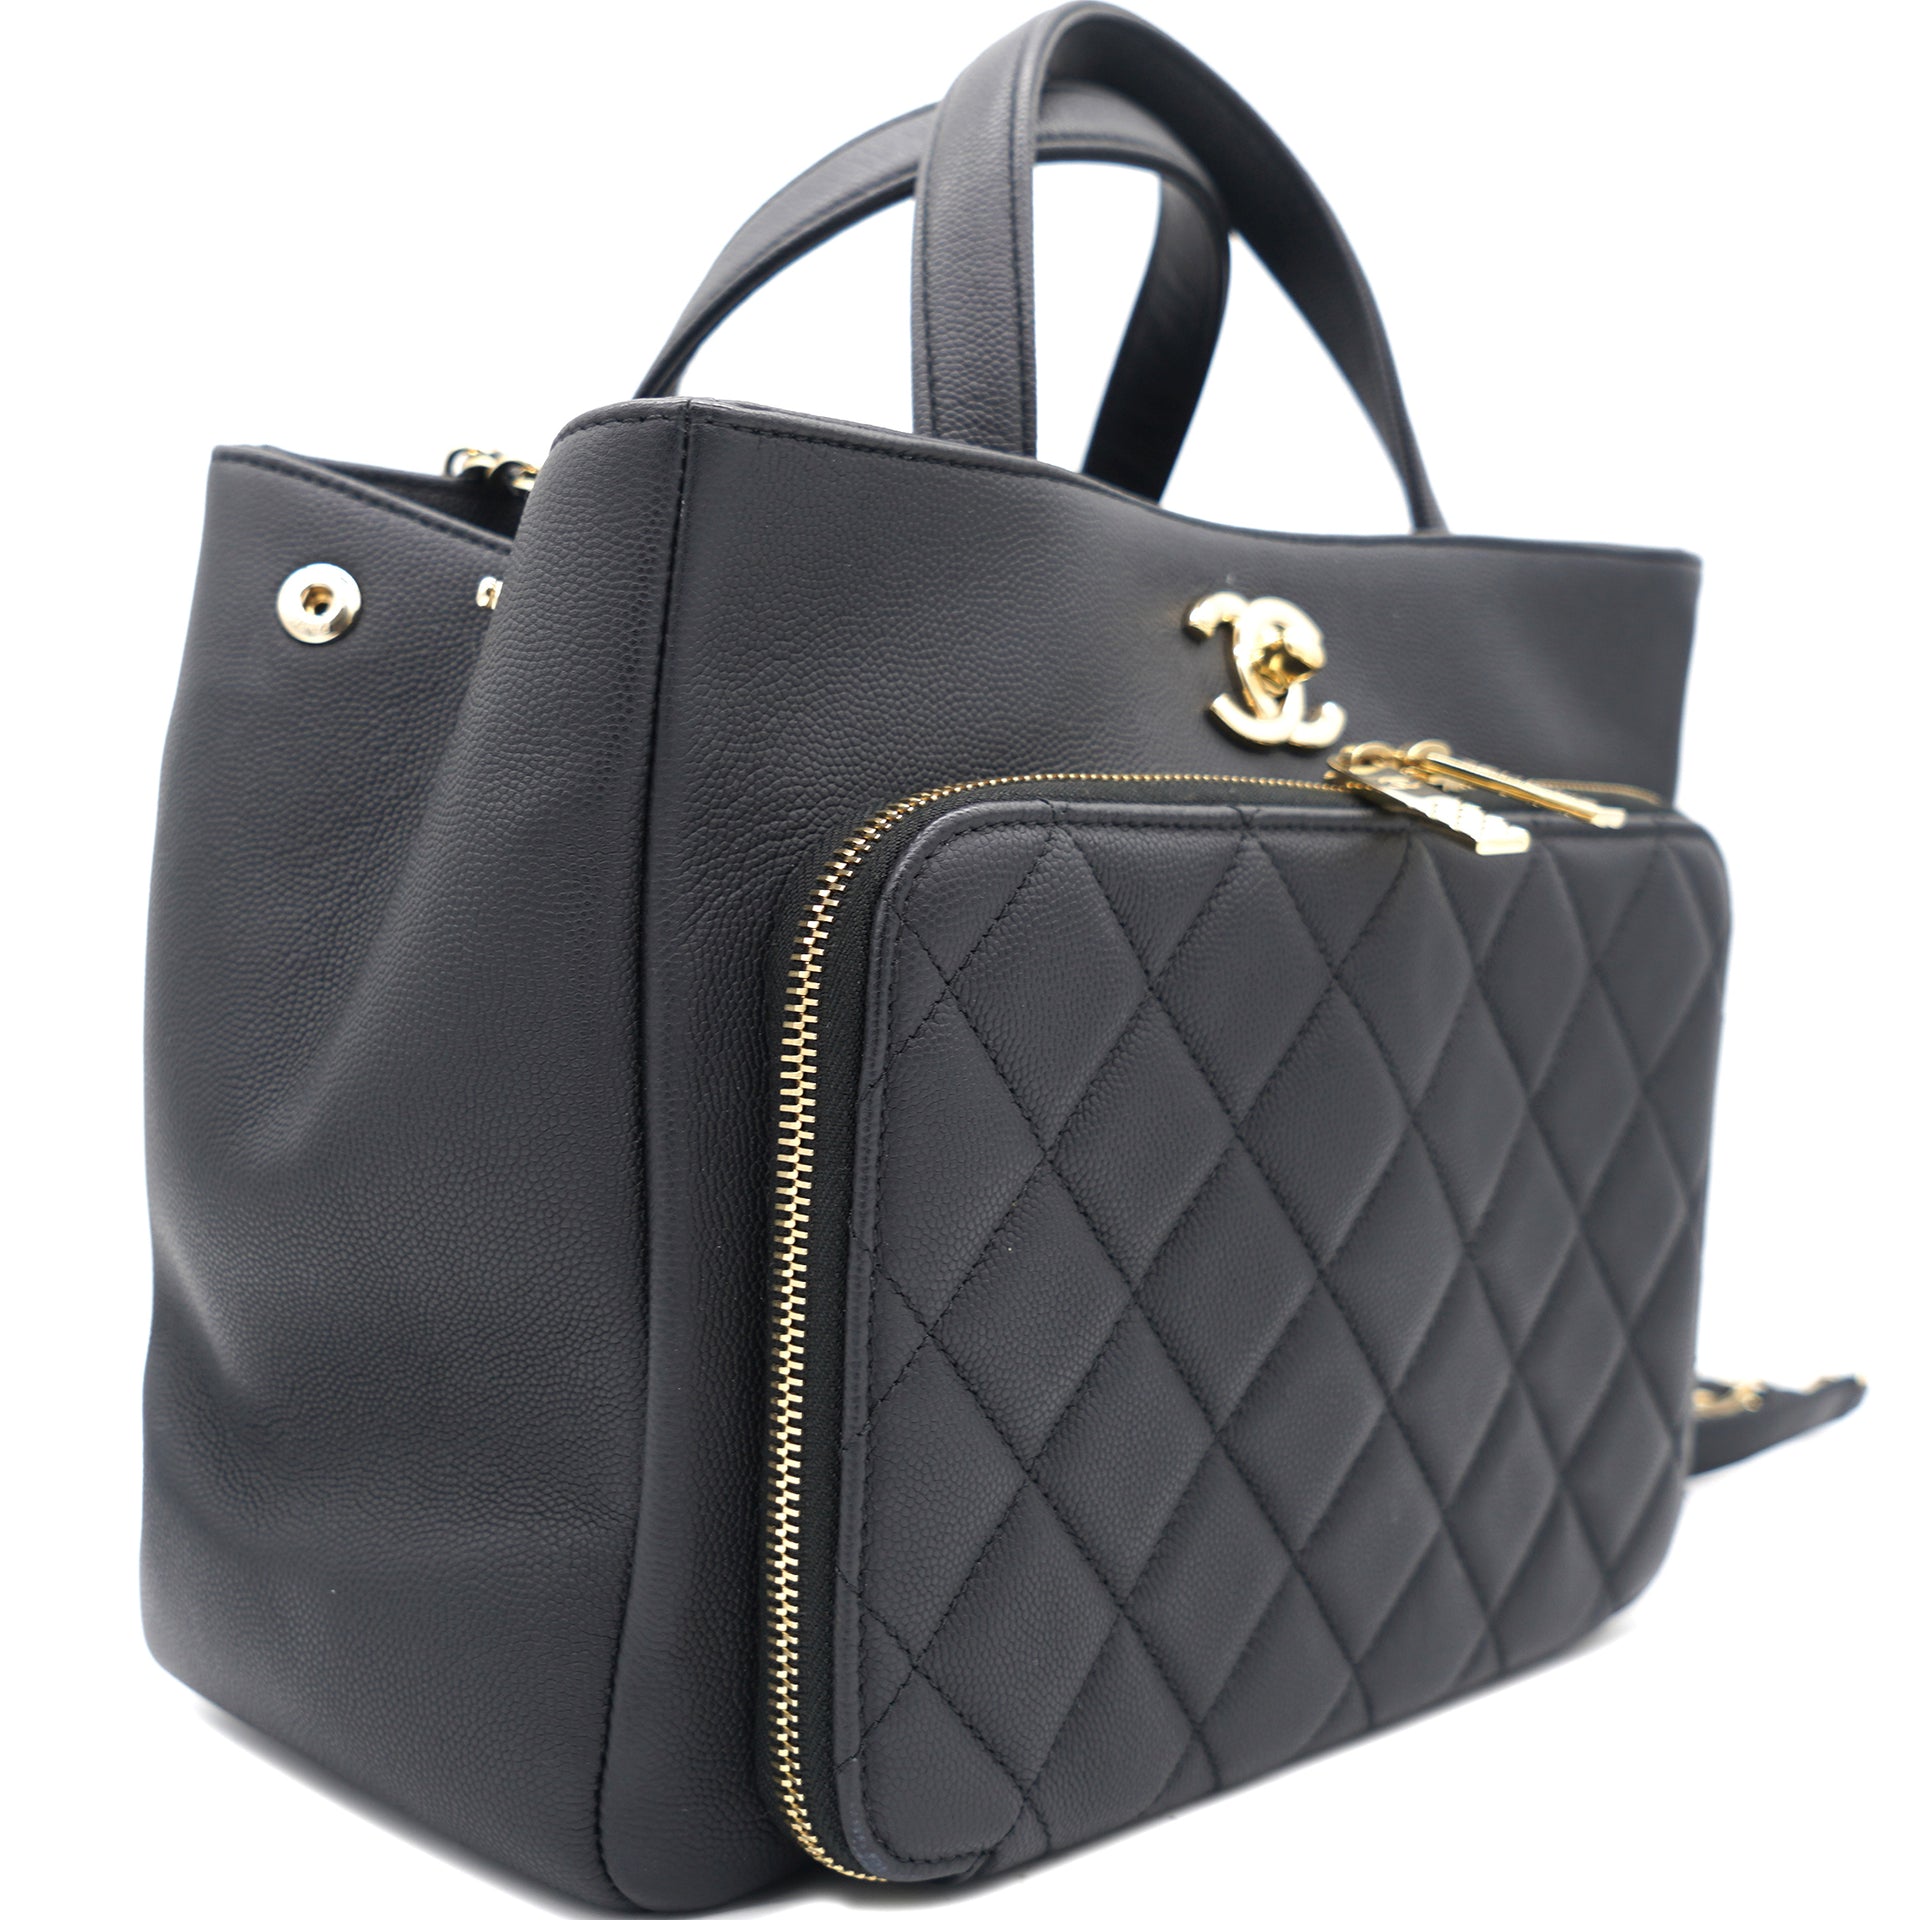 Business Affinity Flap Black Quilted Caviar Leather GHW